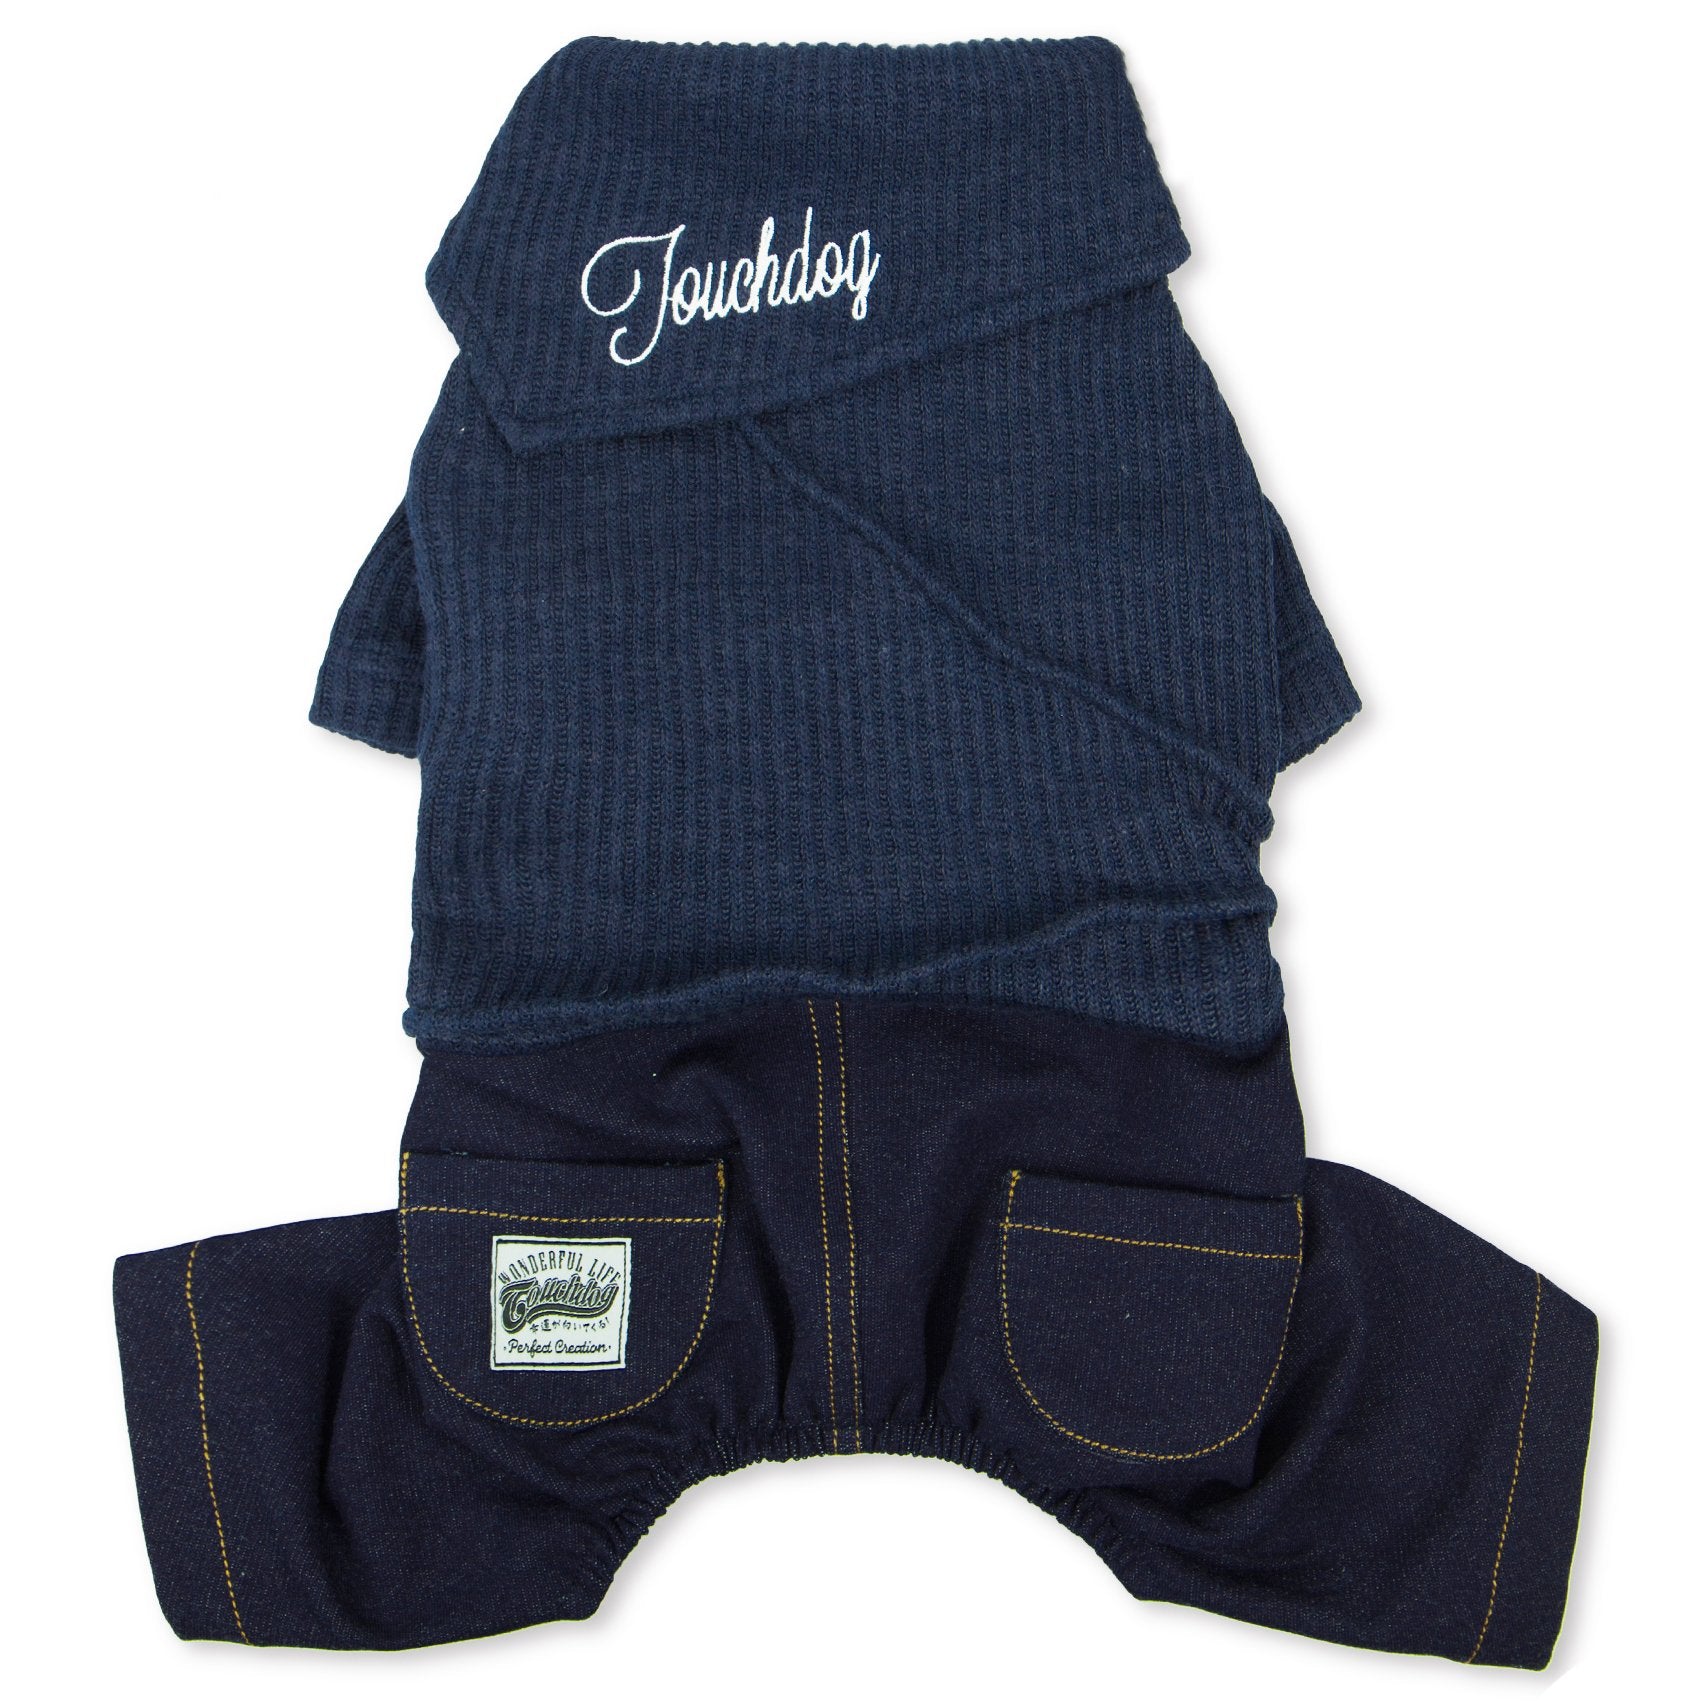 Touchdog Vogue Sweater & Denim Pant Outfit - X-Small - Navy